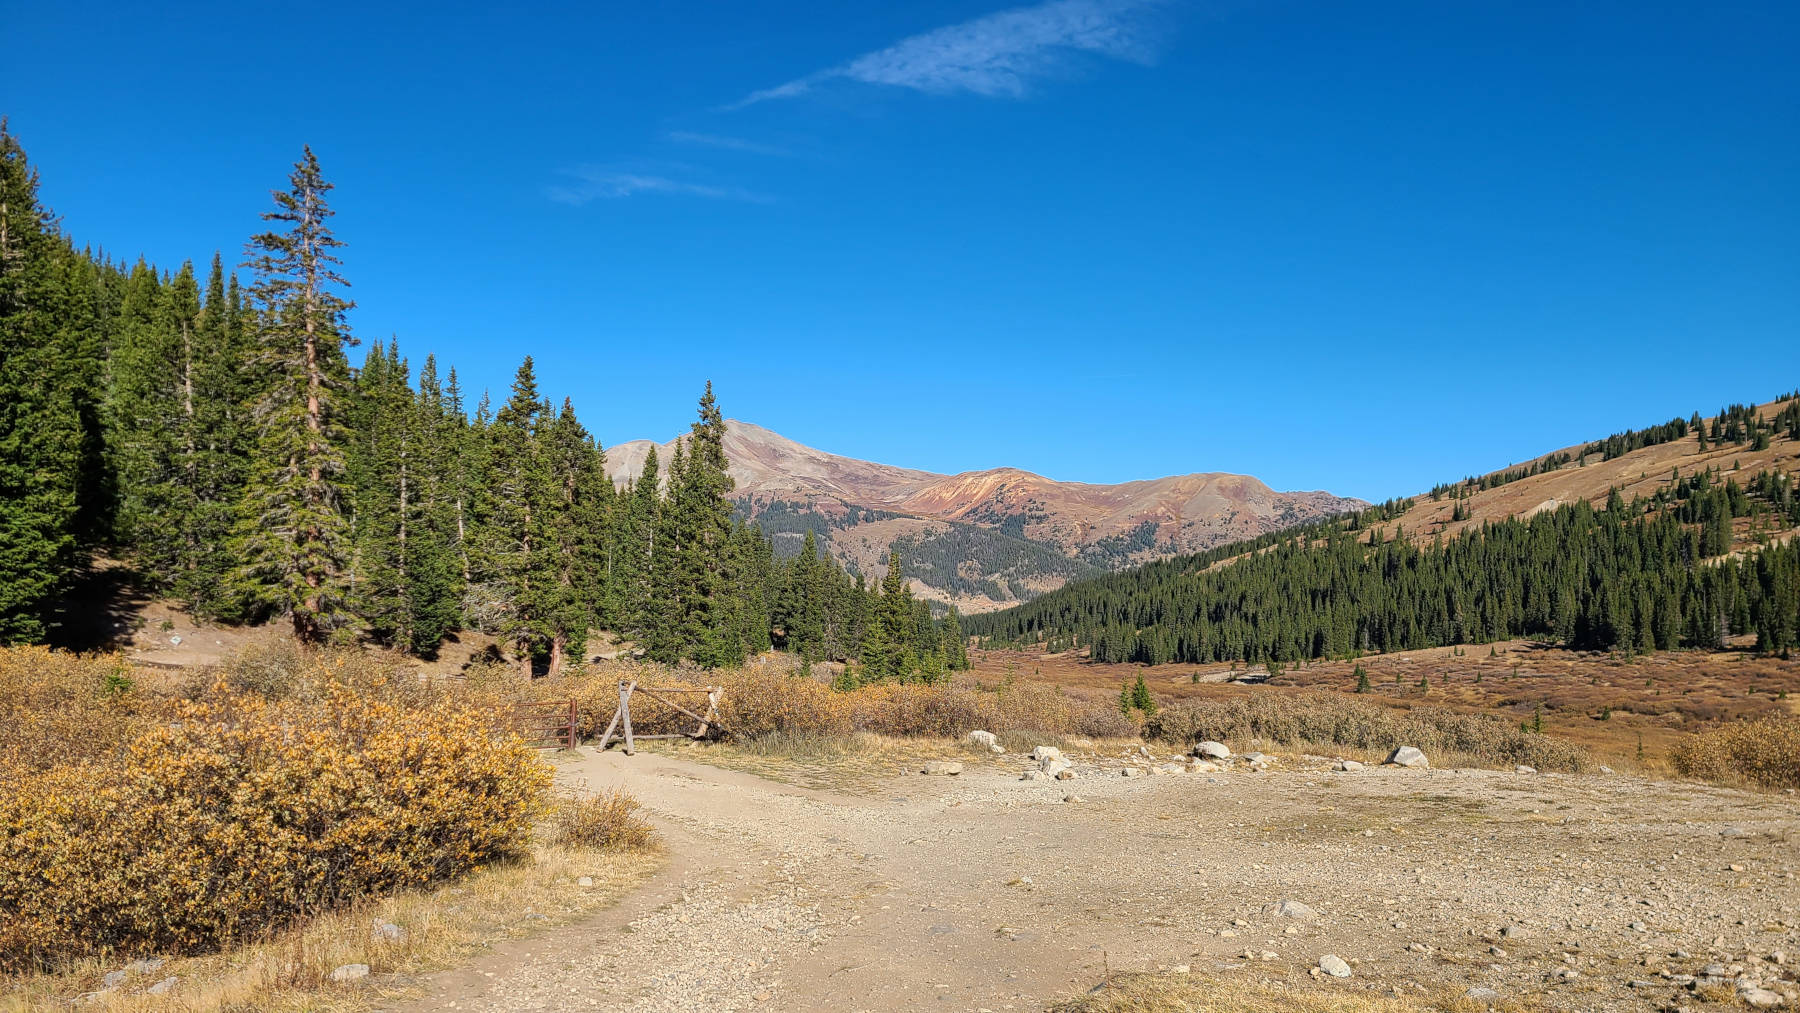 Taking in the 360 degree views on the Mayflower Gulch Trail in Leadville, CO